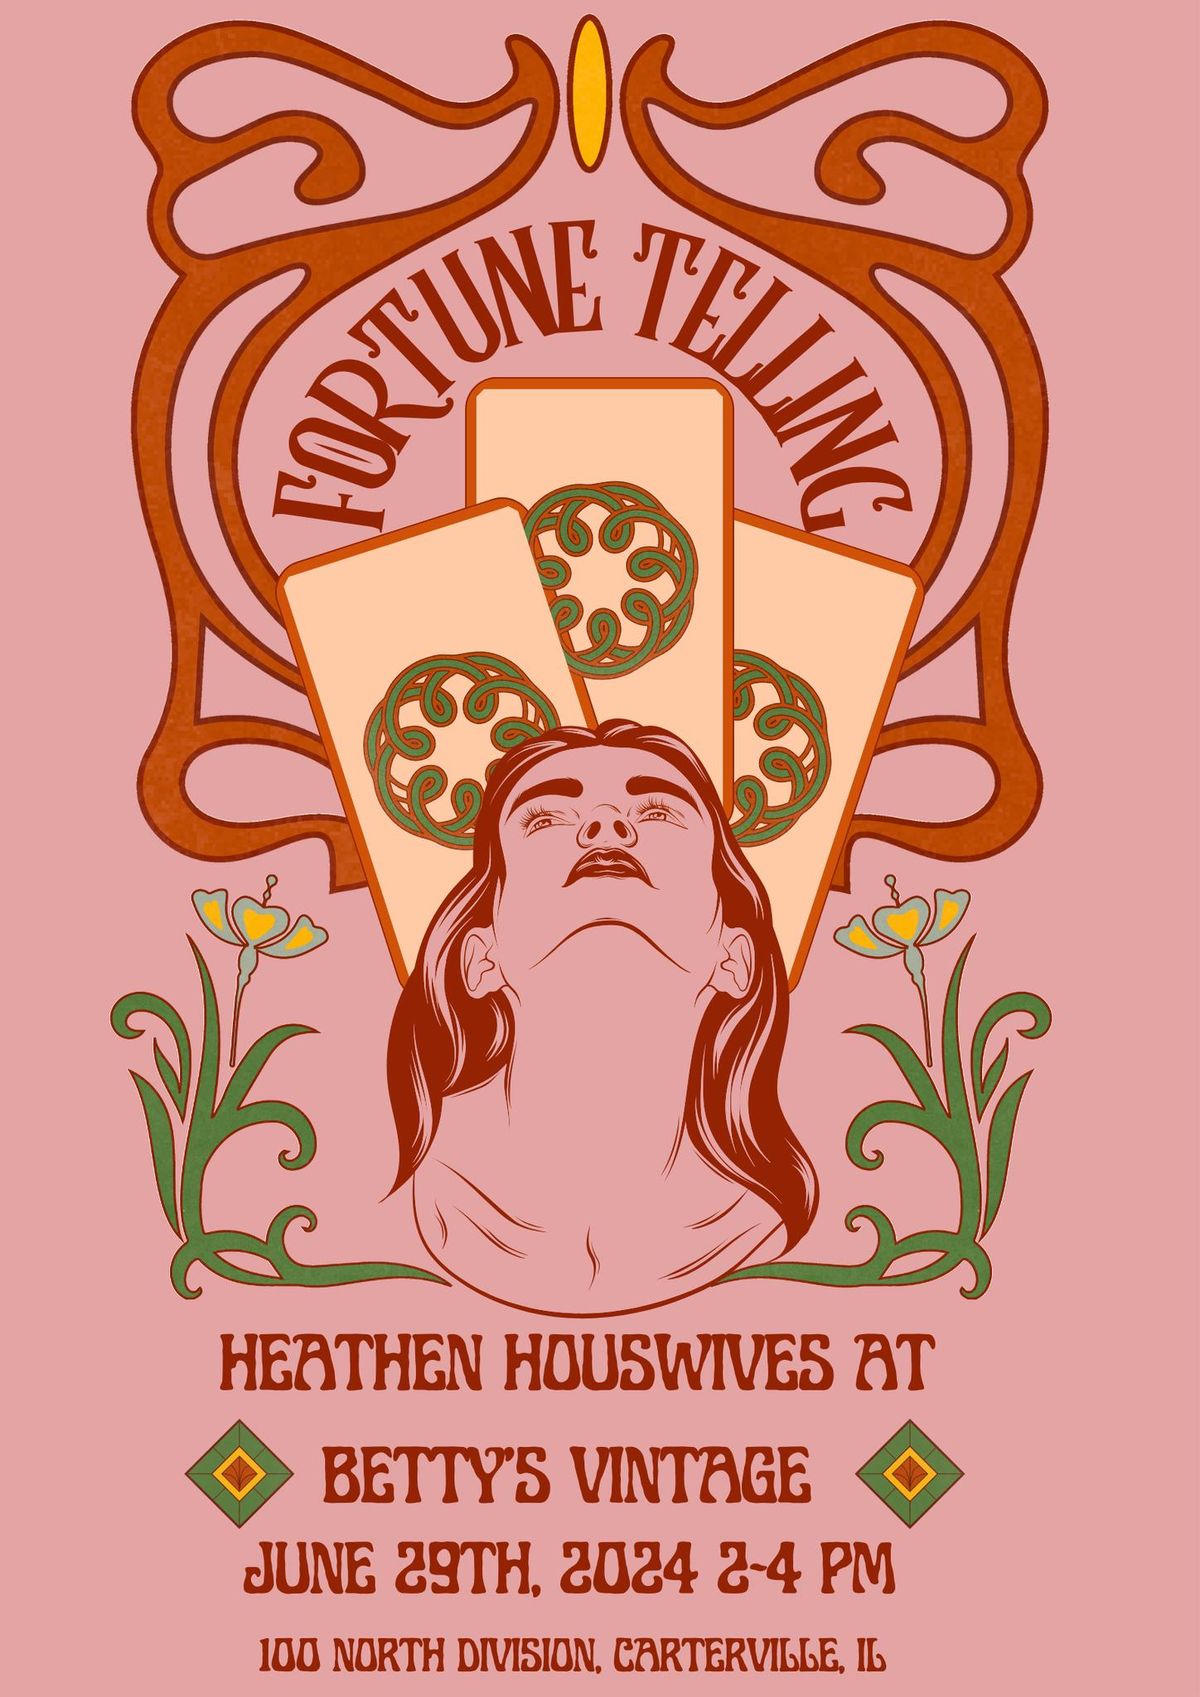 Betty's Vintage Presents Heathen Housewives Fortune Telling Card Readings